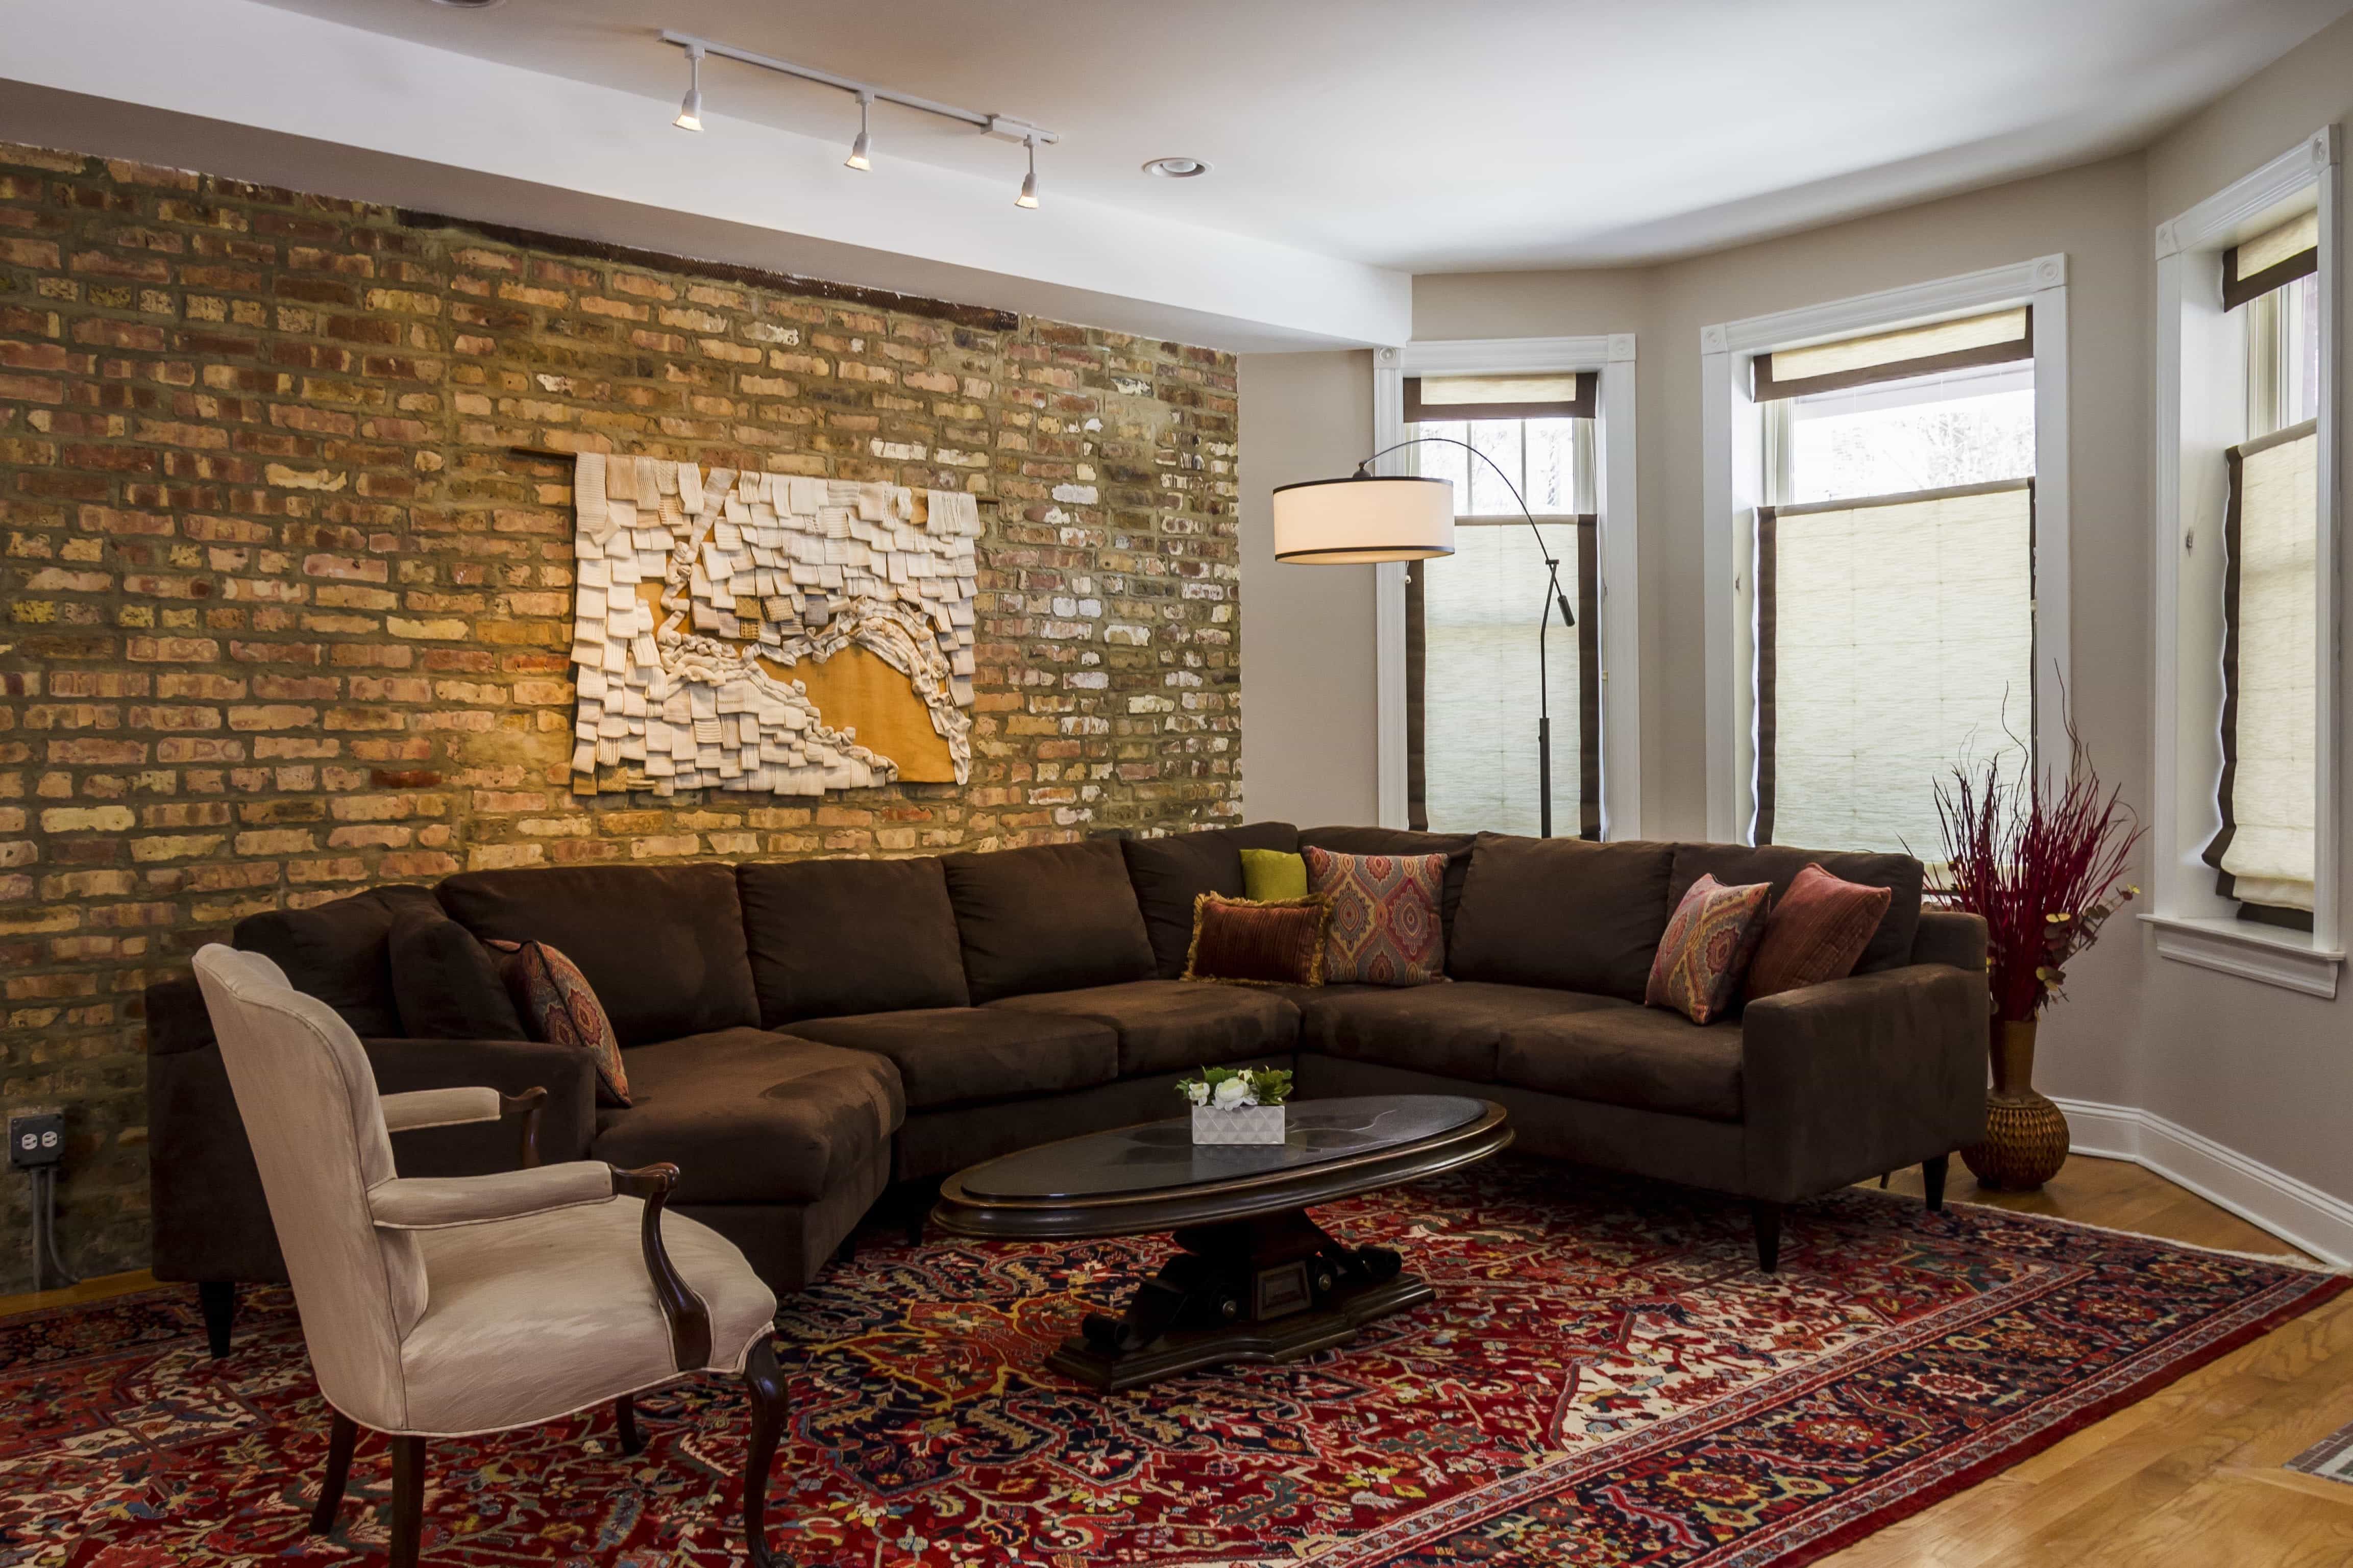 Contemporary Living Room With Brick Wall Feature (Photo 25 of 30)